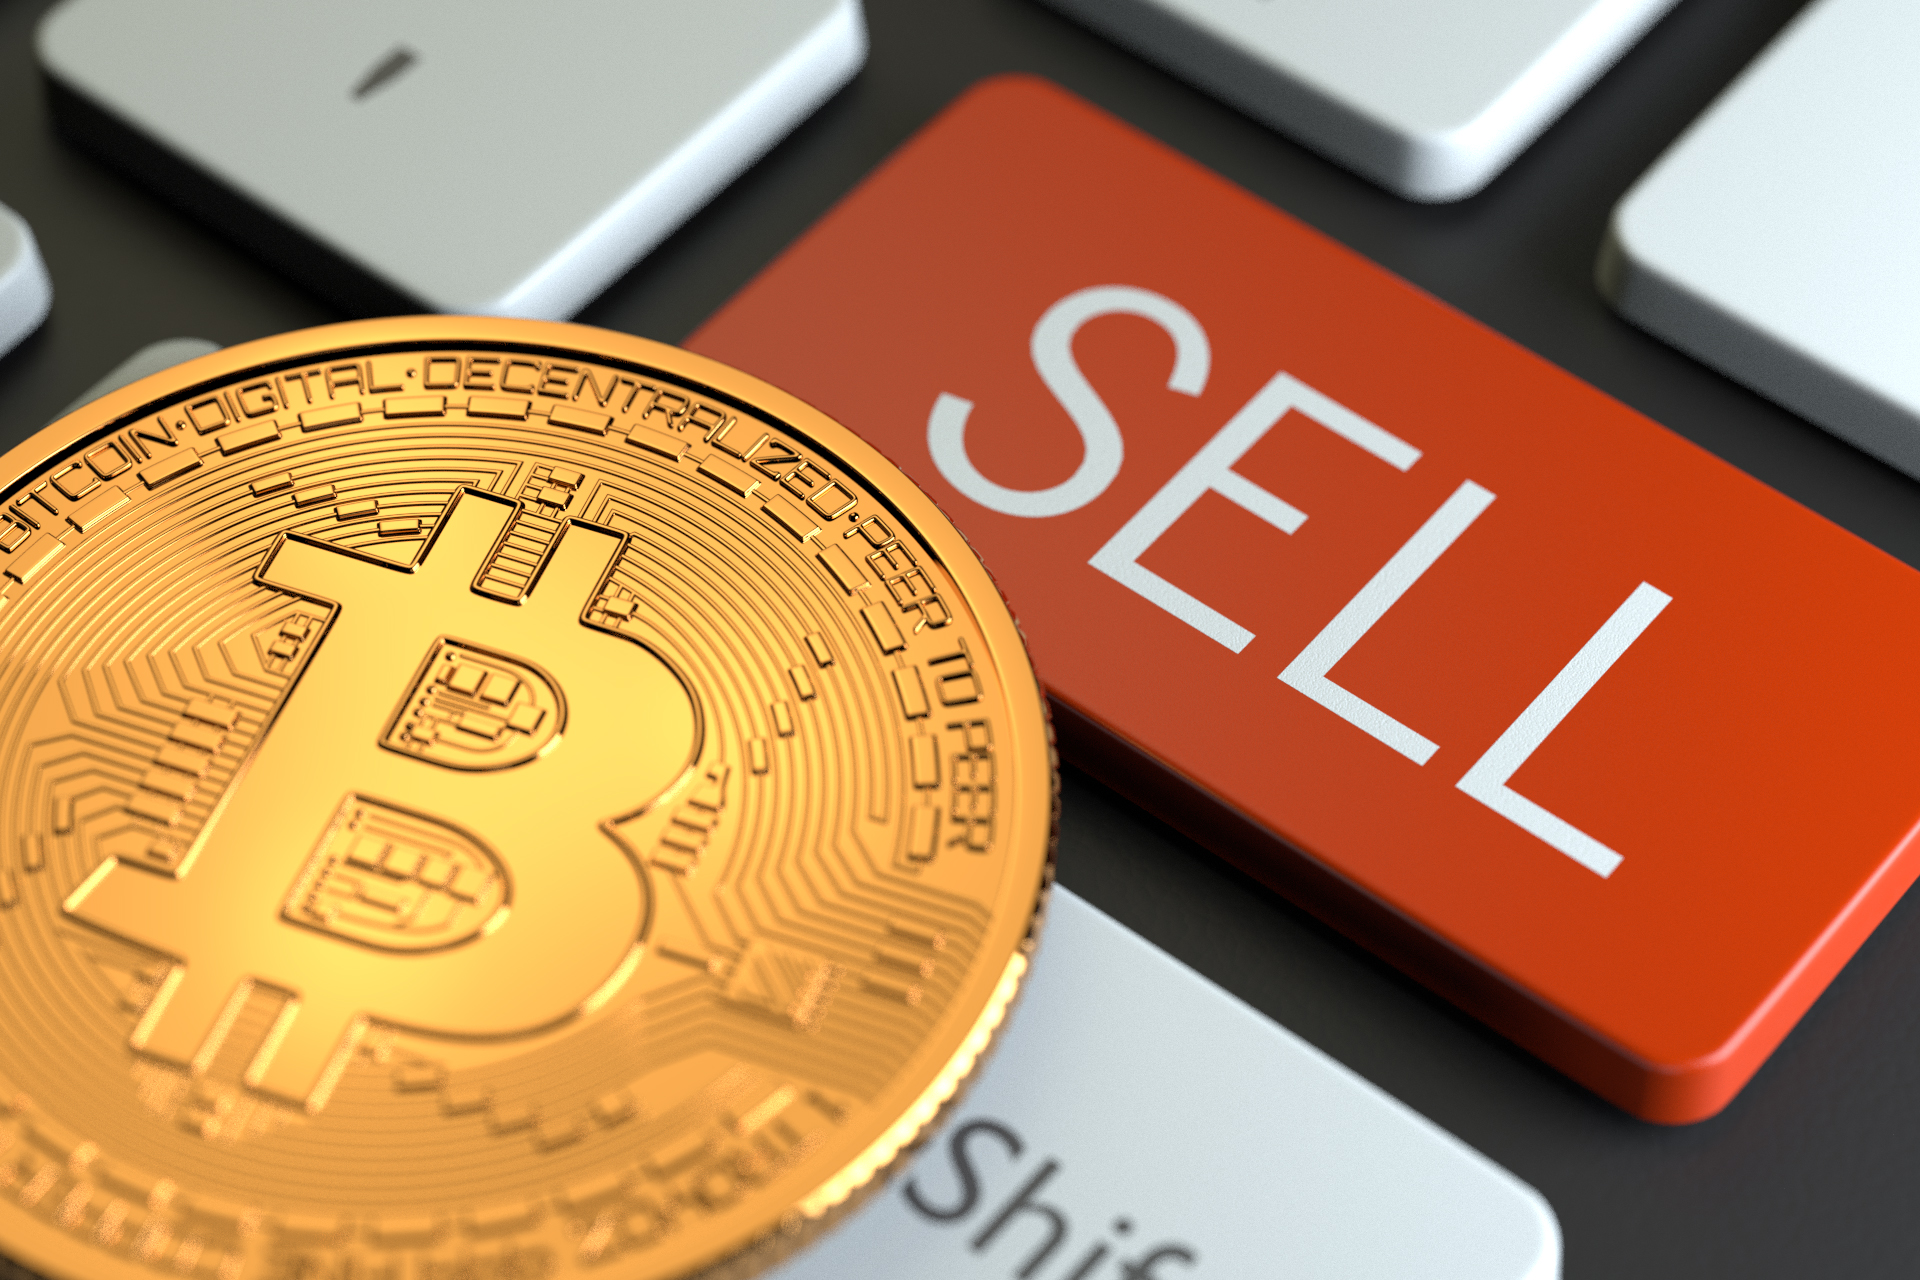 Sell bitcoin keyboard concept free image download